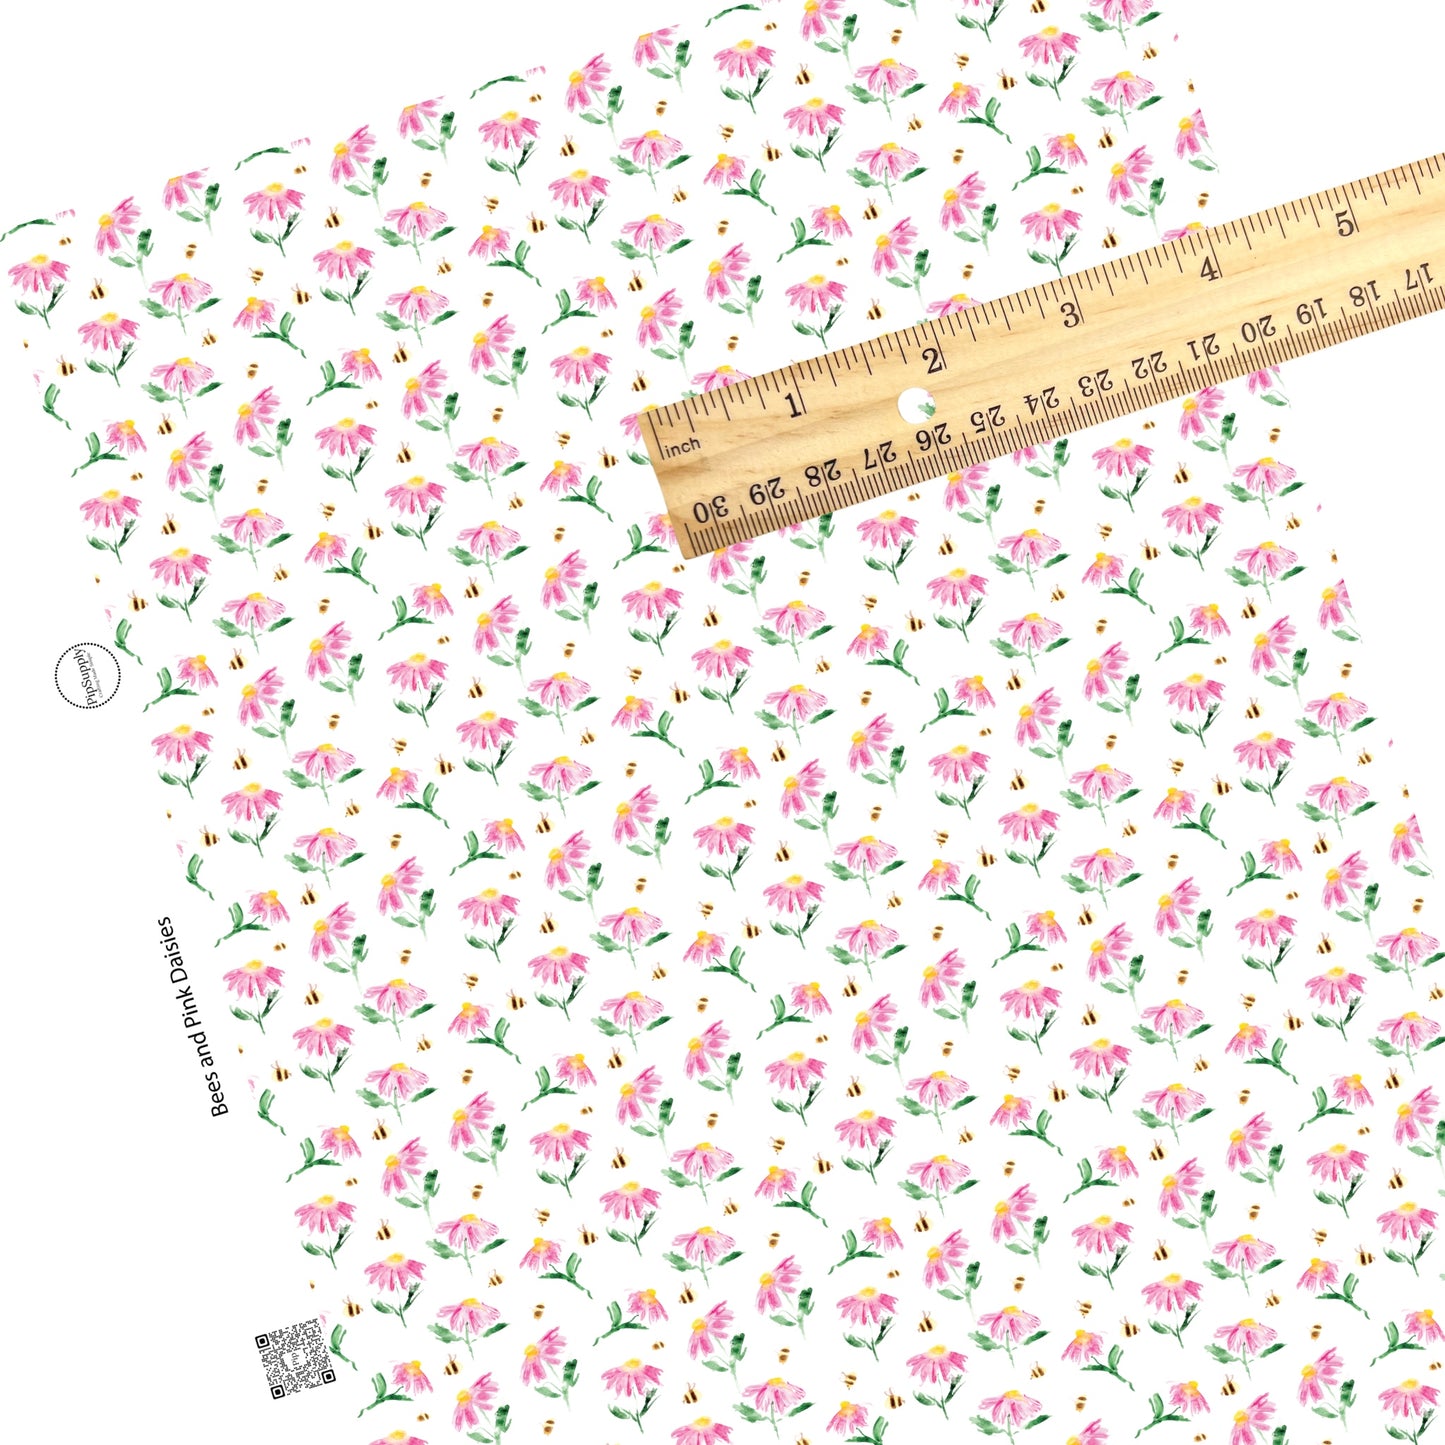 Bumble bees and pink flowers on white faux leather sheet